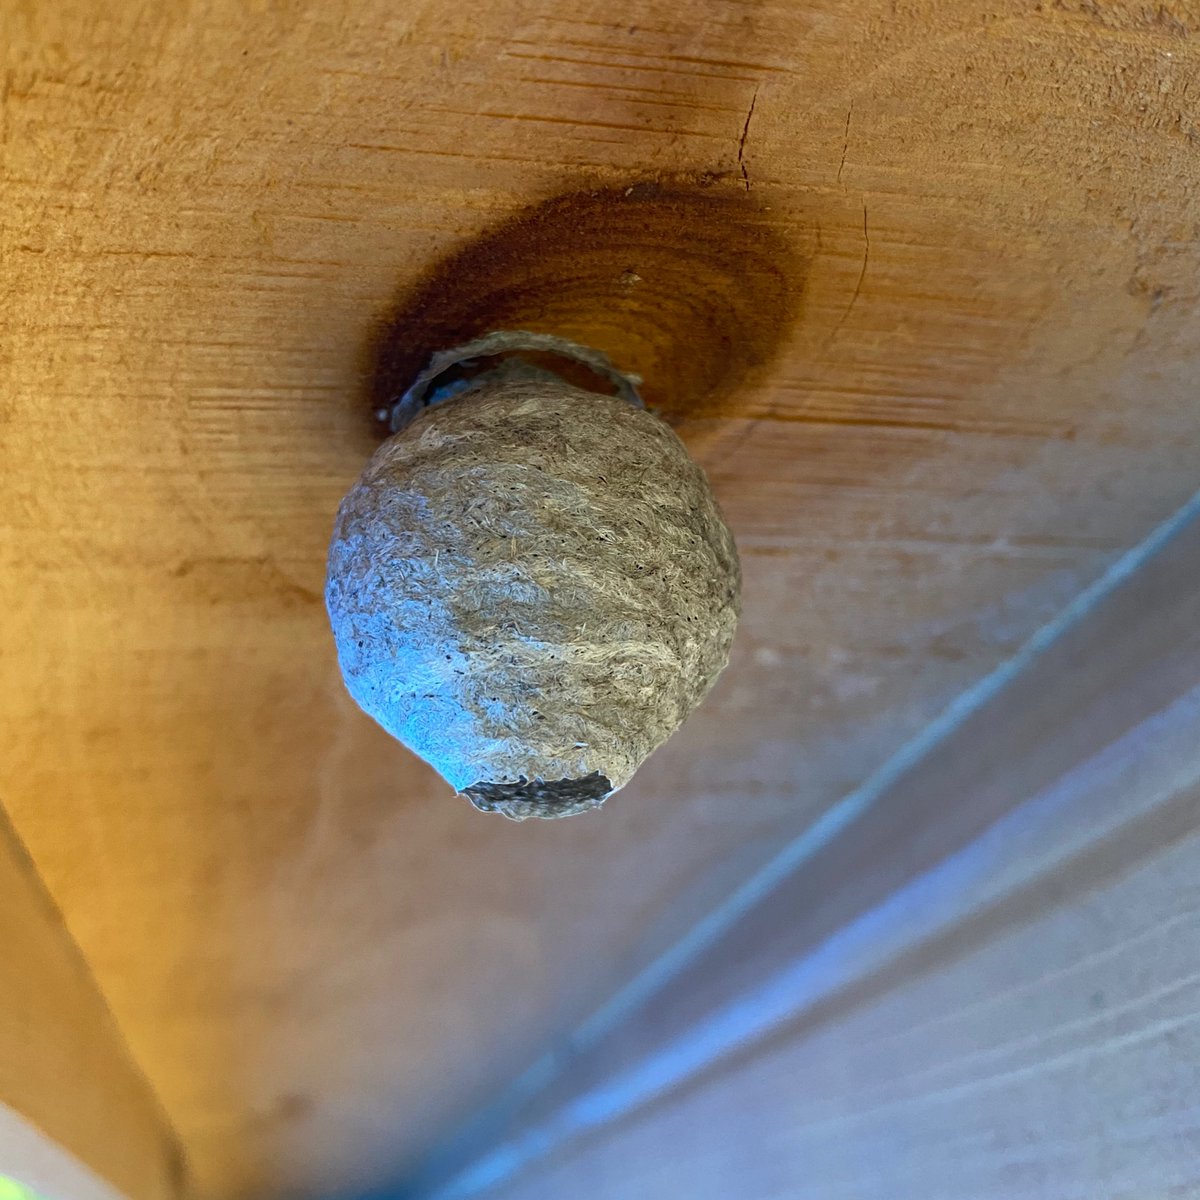 Yellowjackets can build aerial nests, underground nests or find a place indoors through a hole in the wall. They have multiple-tiers surrounded in a paper envelope (also made from pulp from weathered wood, lumber, mulch, etc).